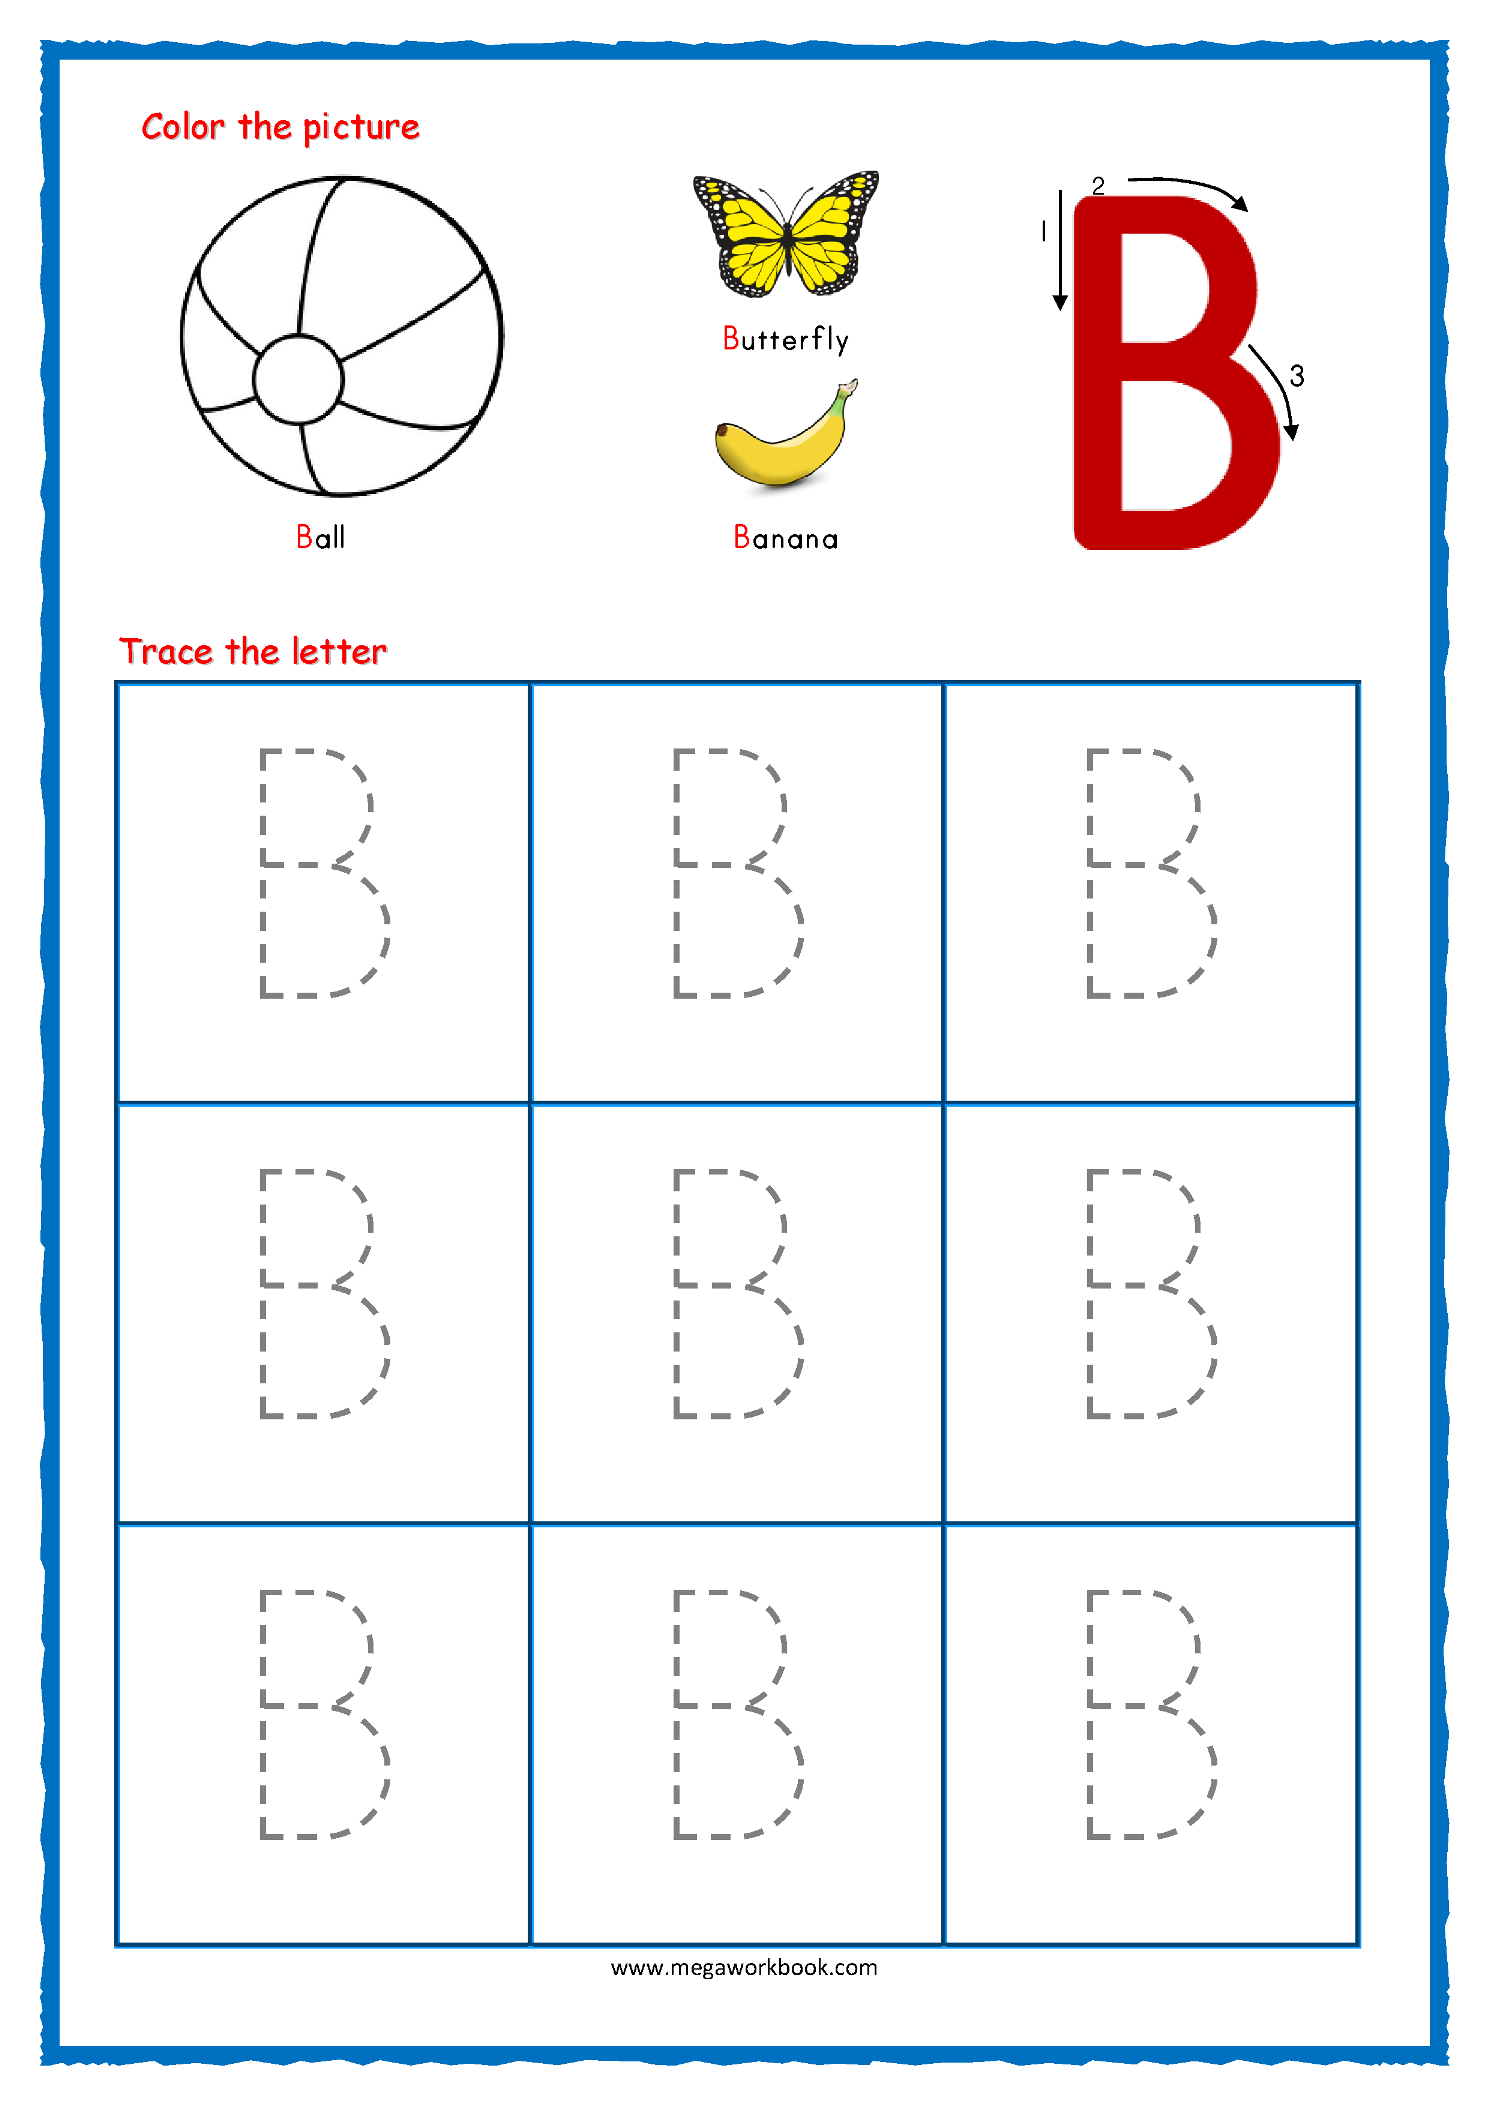 Tracing Letters - Alphabet Tracing - Capital Letters pertaining to Tracing Letters For Nursery